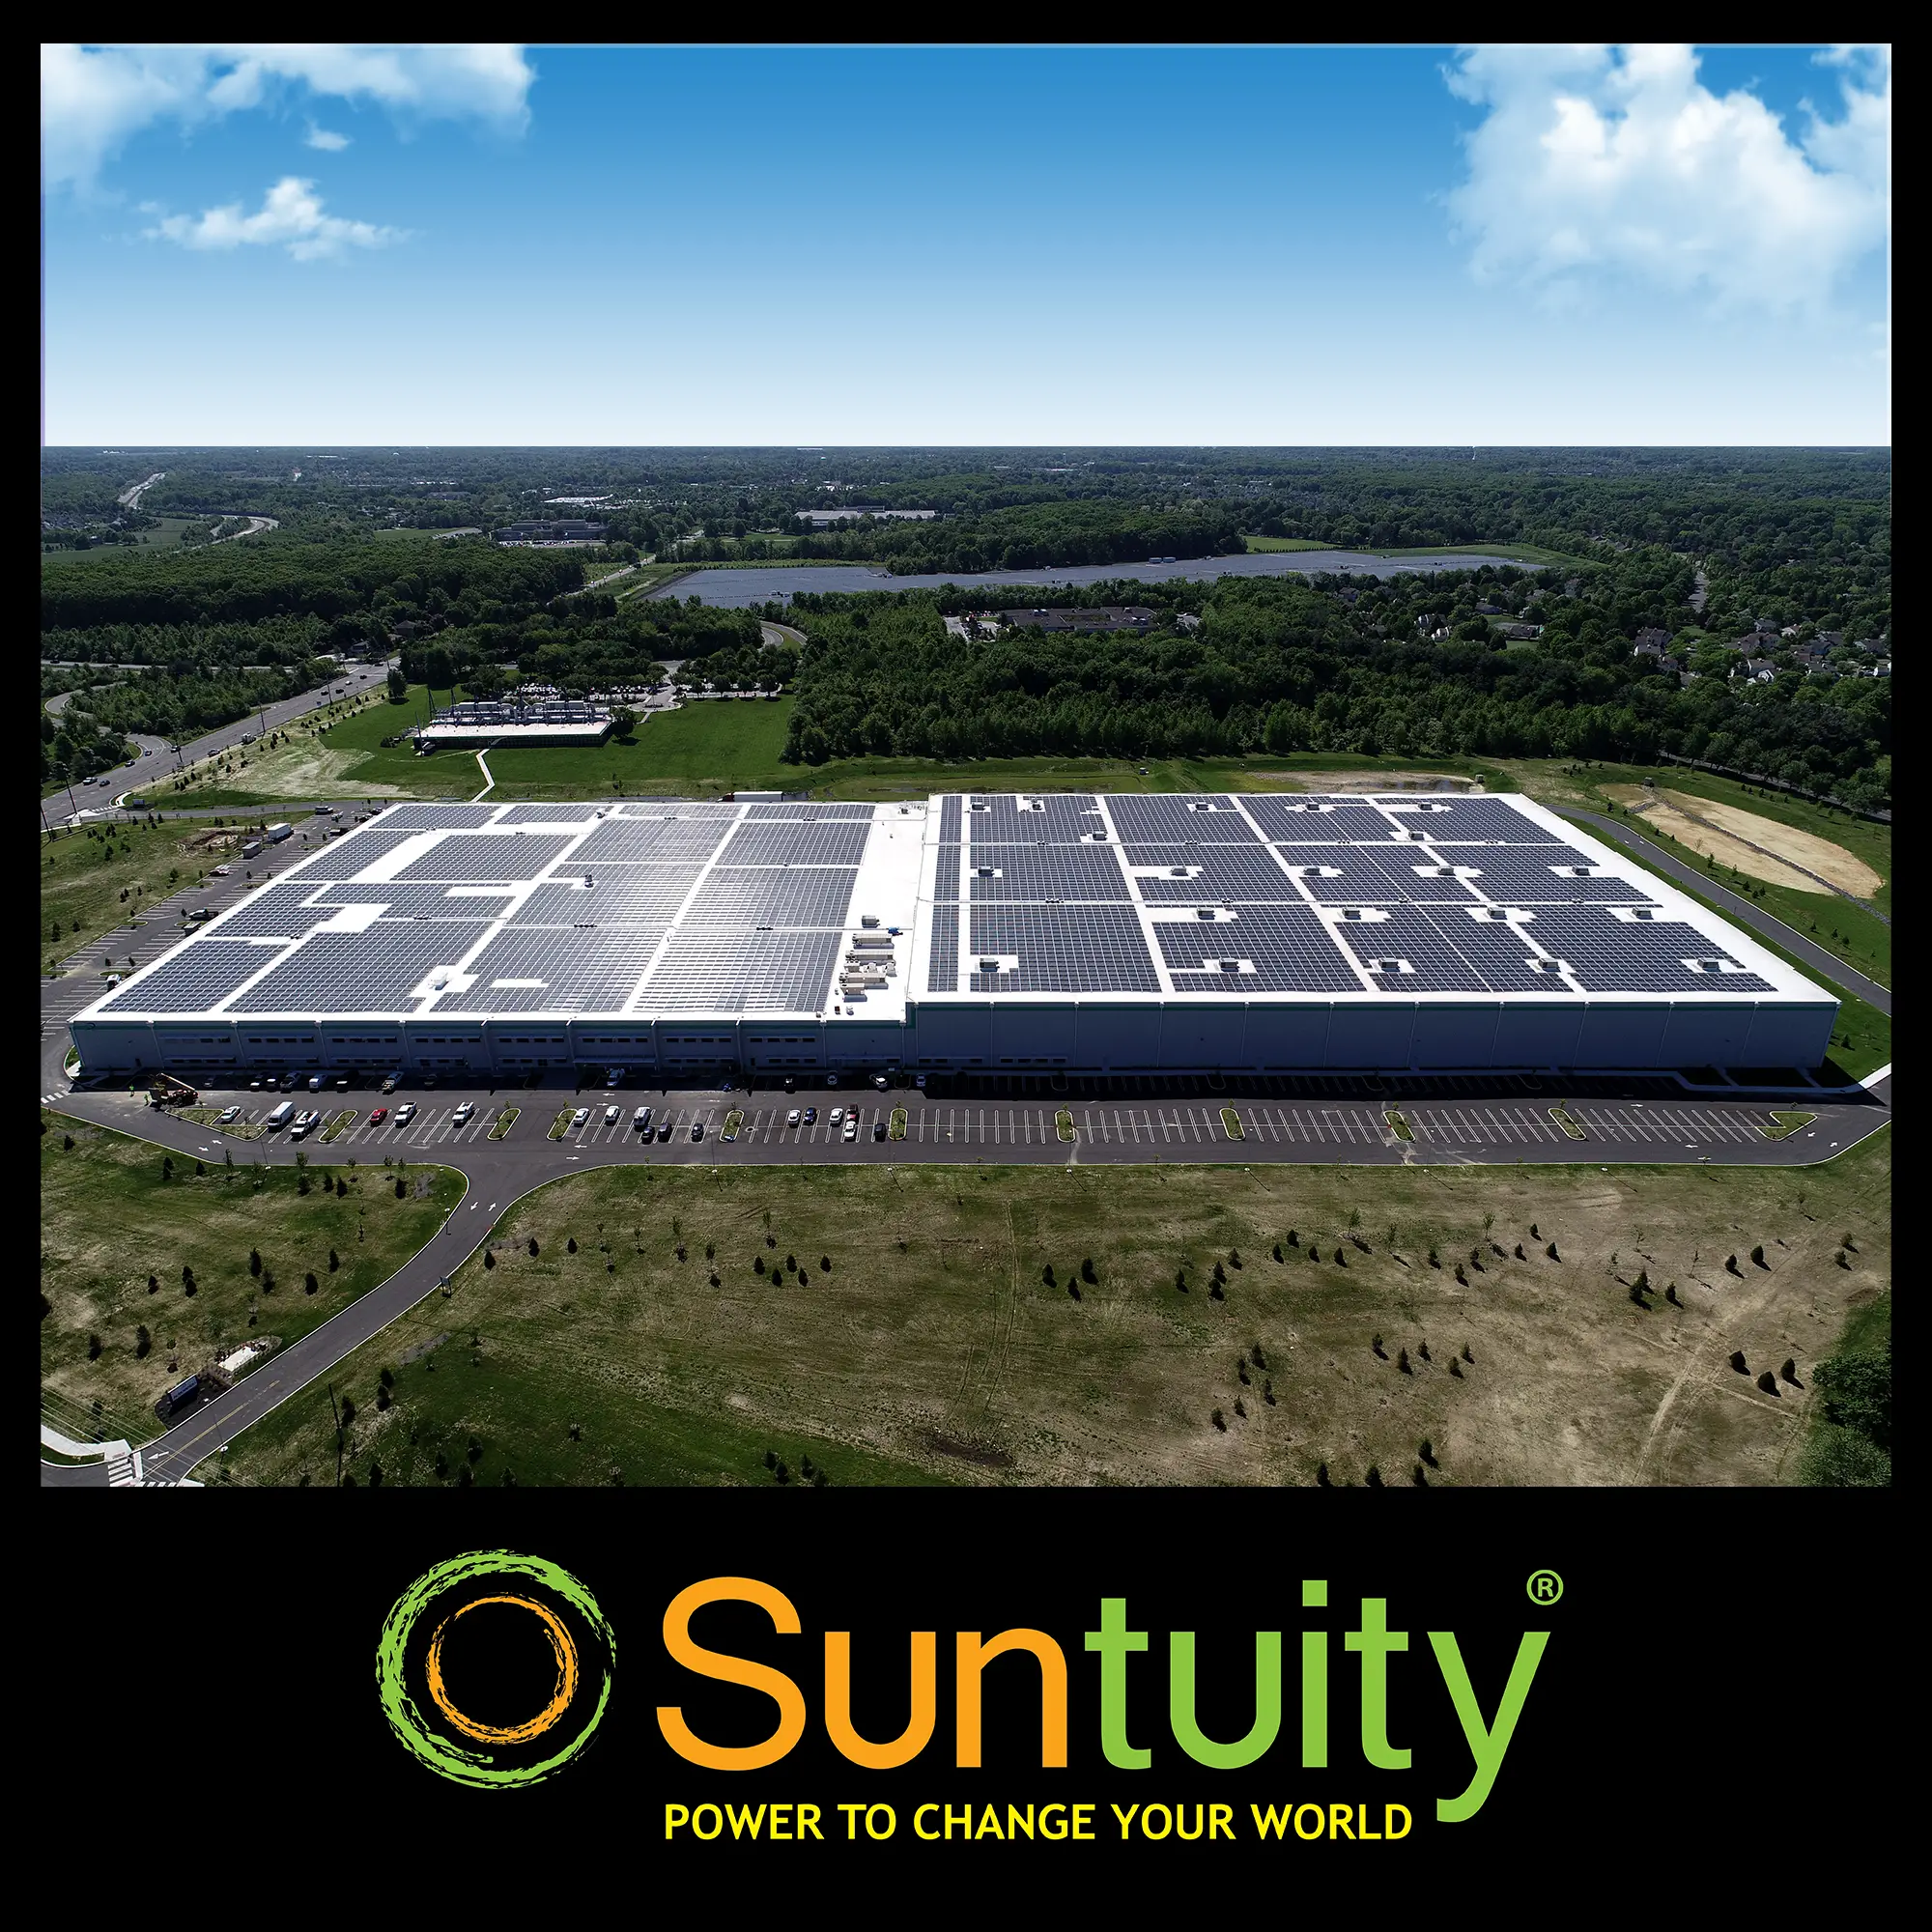 Suntuity Delivers One of New Jerseyâs Largest Rooftop Solar PV Systems ...